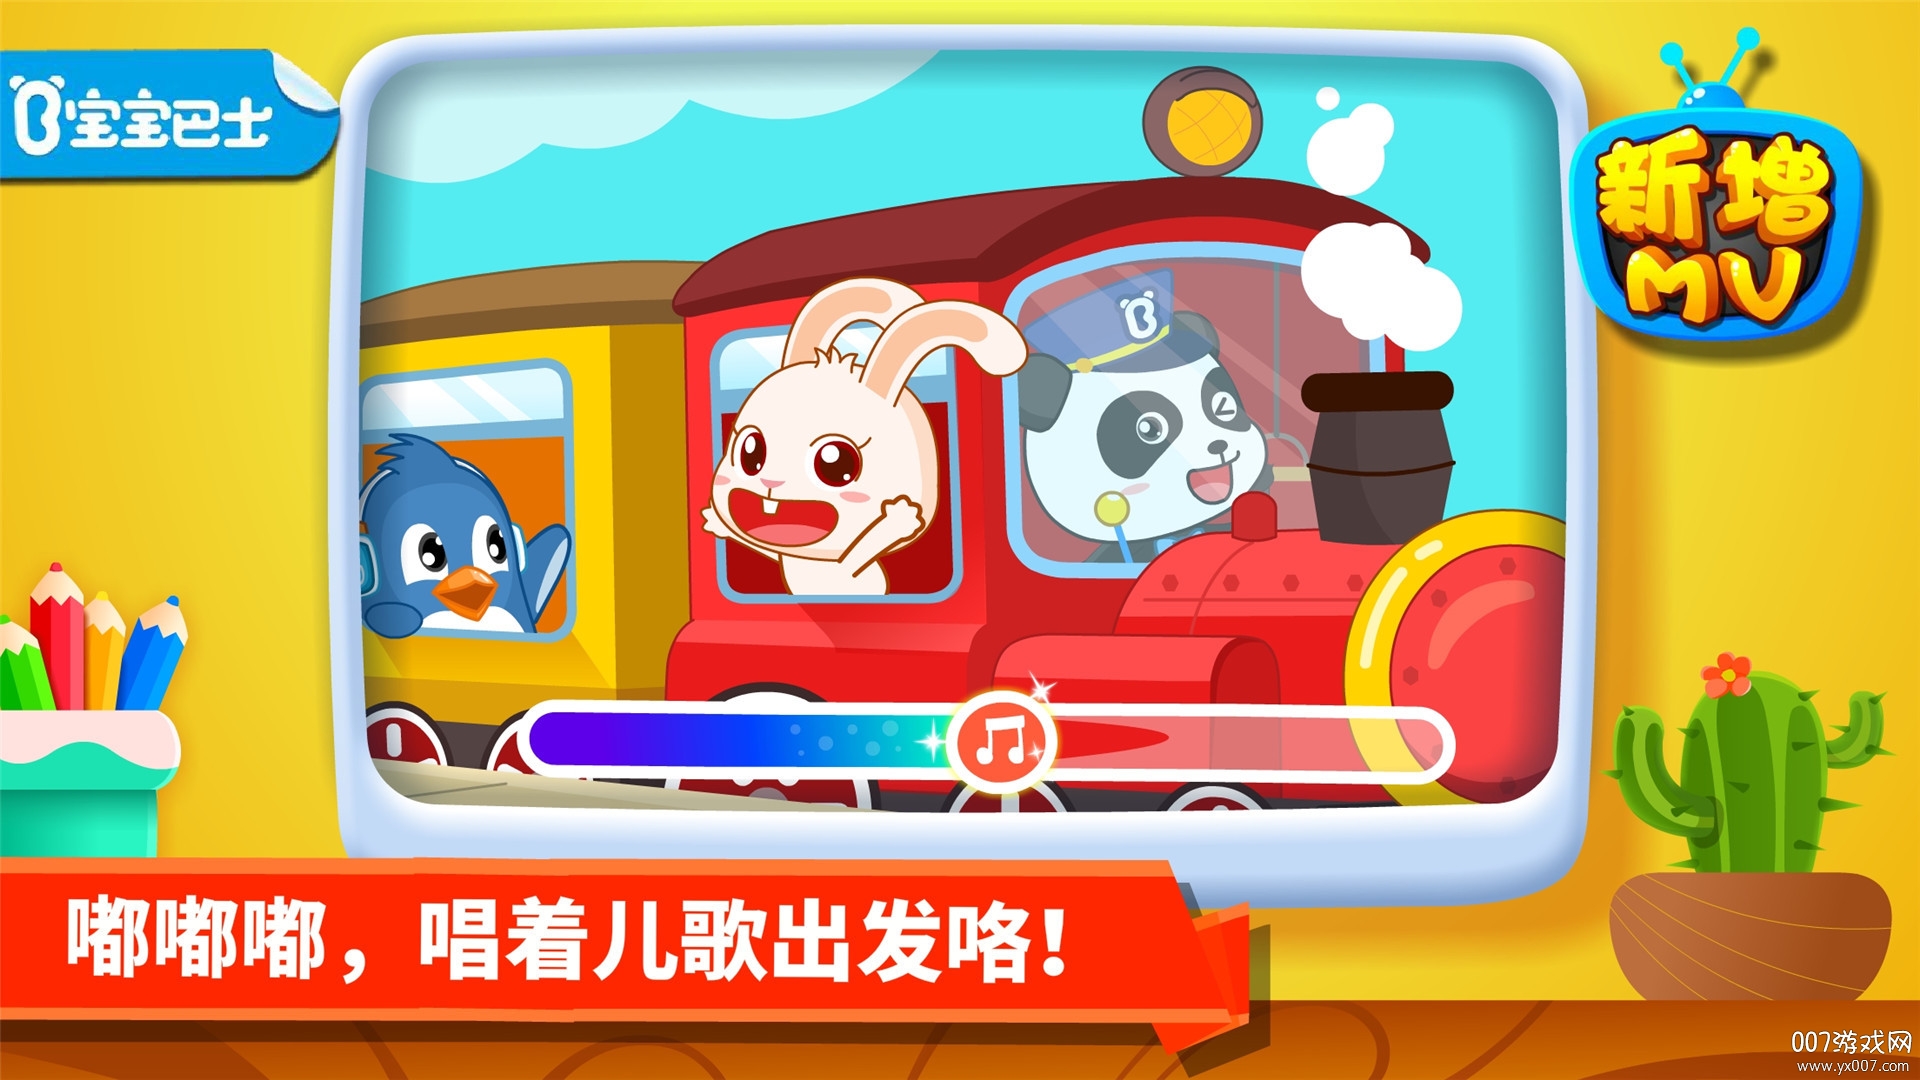 Transport Puzzle Game for Kids-宝宝交通工具拼图游戏: 巴士和汽车 | iappsteam – iphone ...